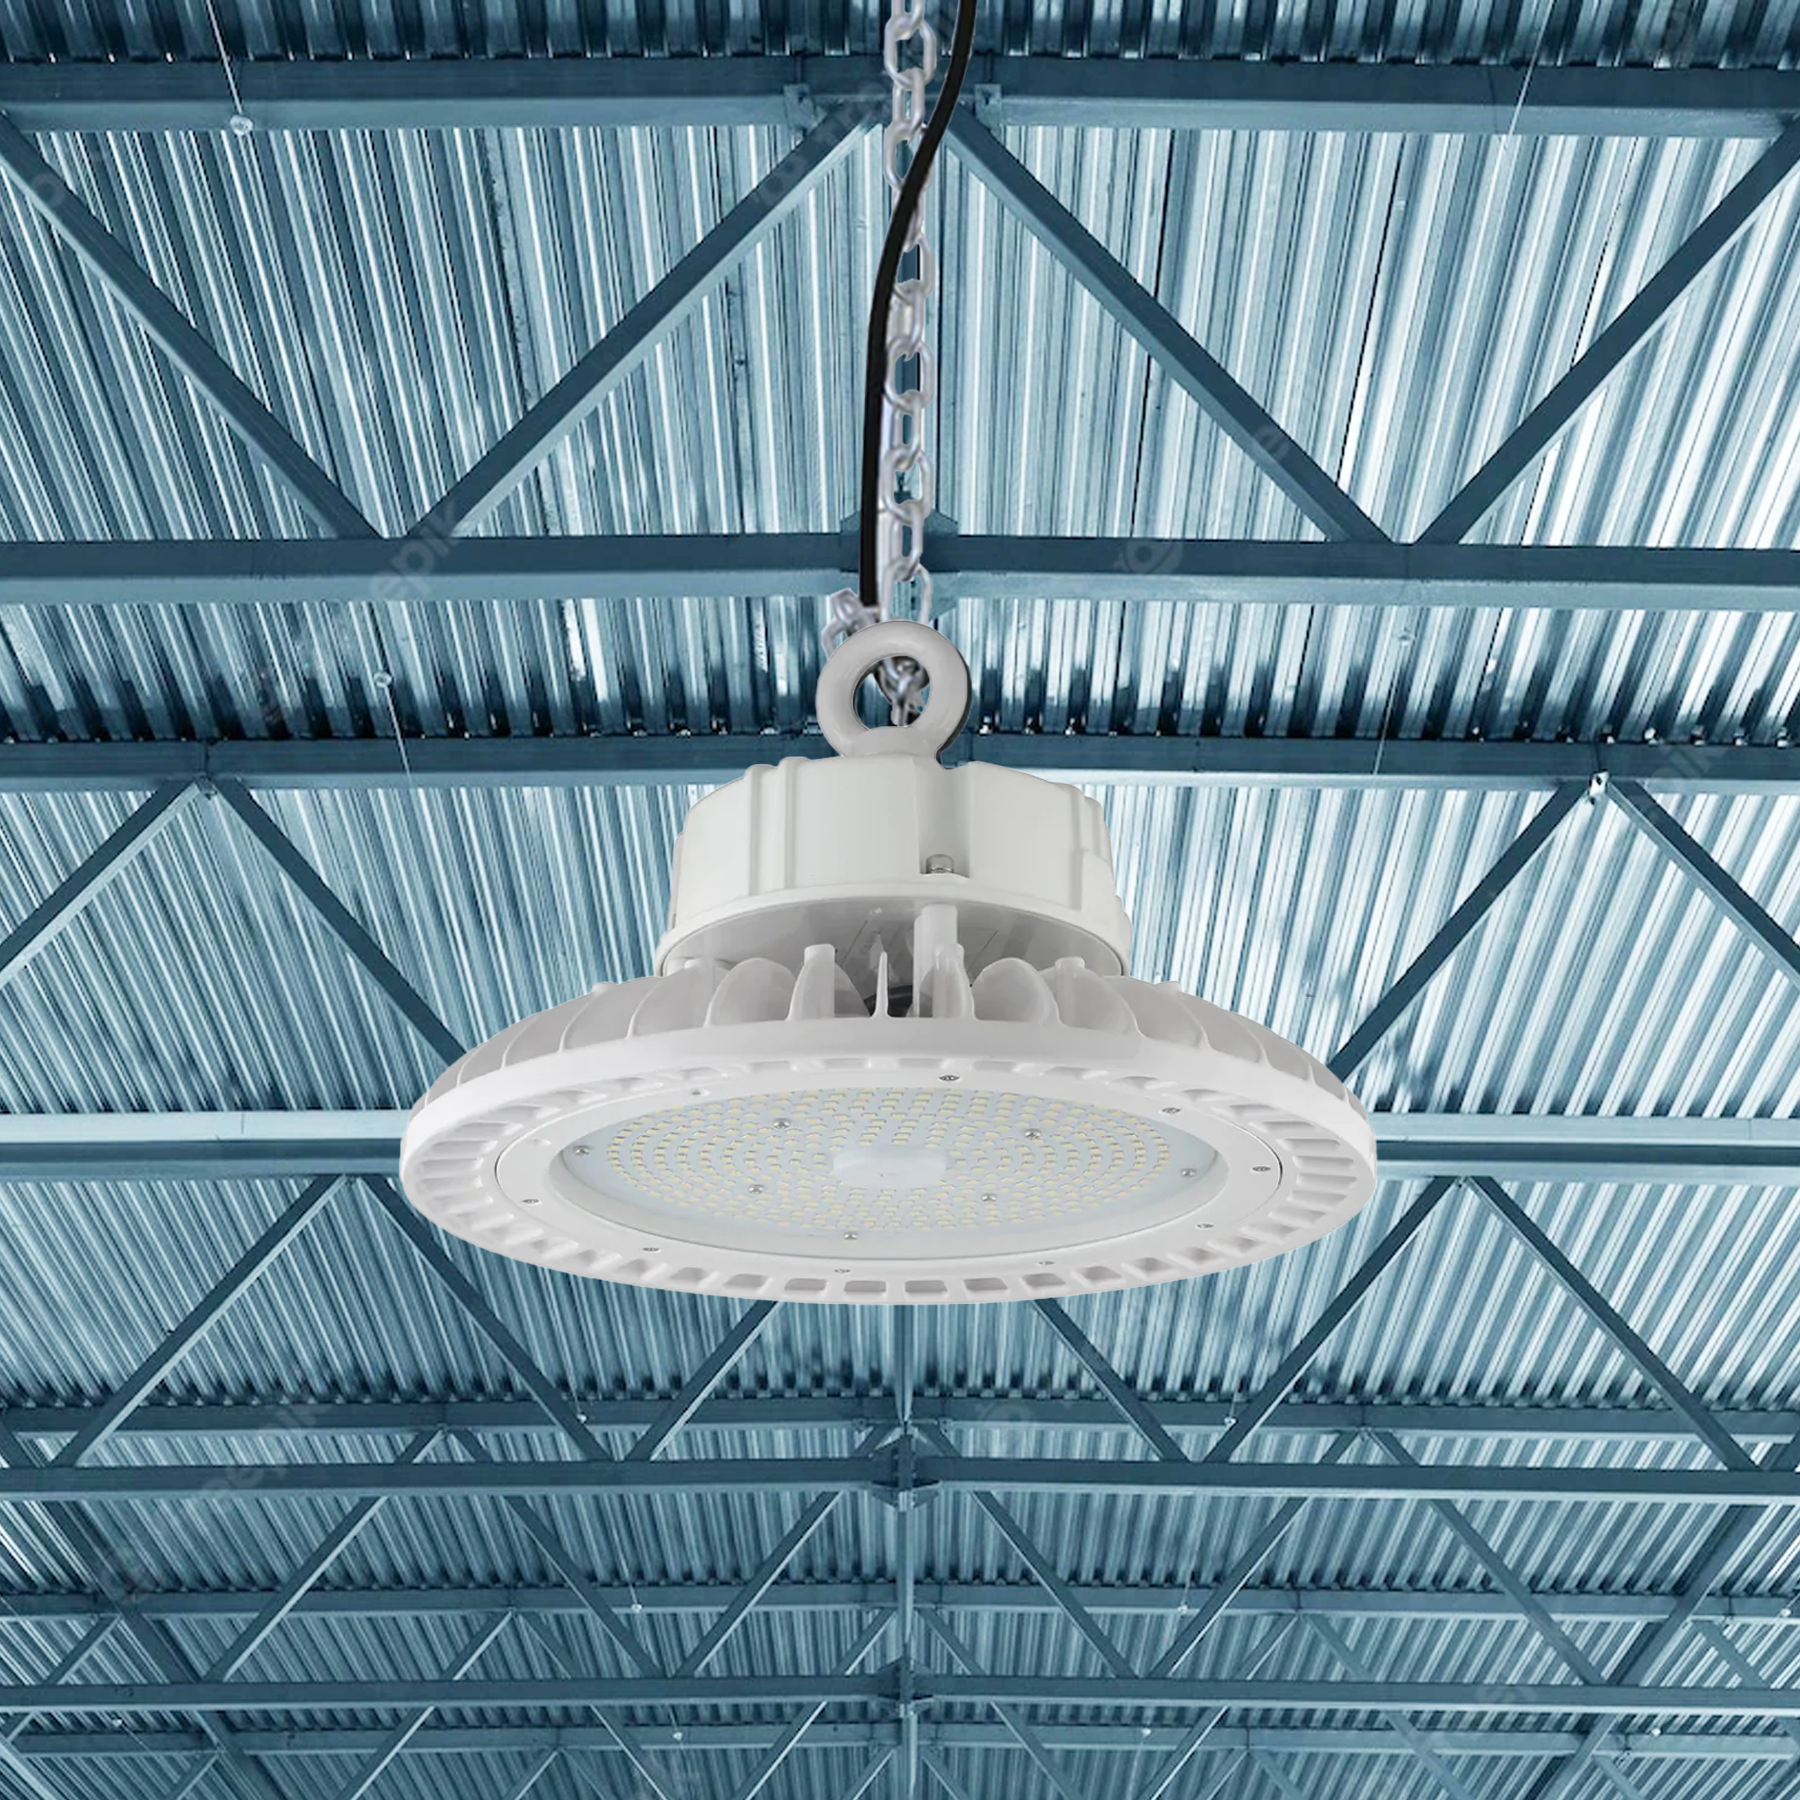 UFO LED High Bay Light 150W, 5700K Daylight White, 21750LM, UL, DLC Listed, AC100-277V, 1-10V Dimmable, White, For Warehouse Barn Airport Workshop Garage Factory